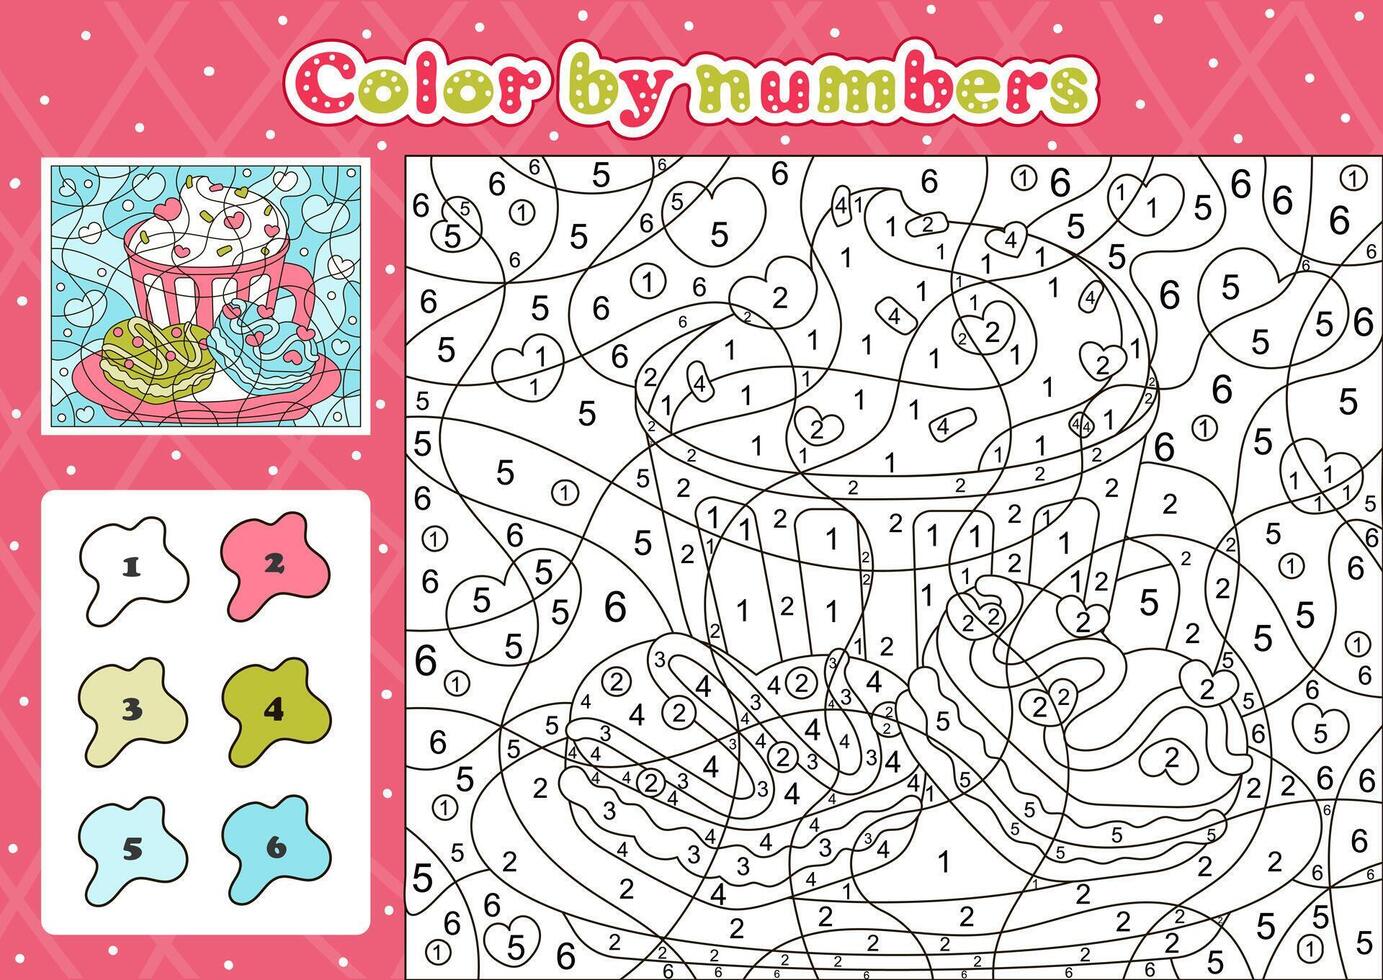 Food and drinks themed coloring page by number for kids with cute mug with latte and macarons vector